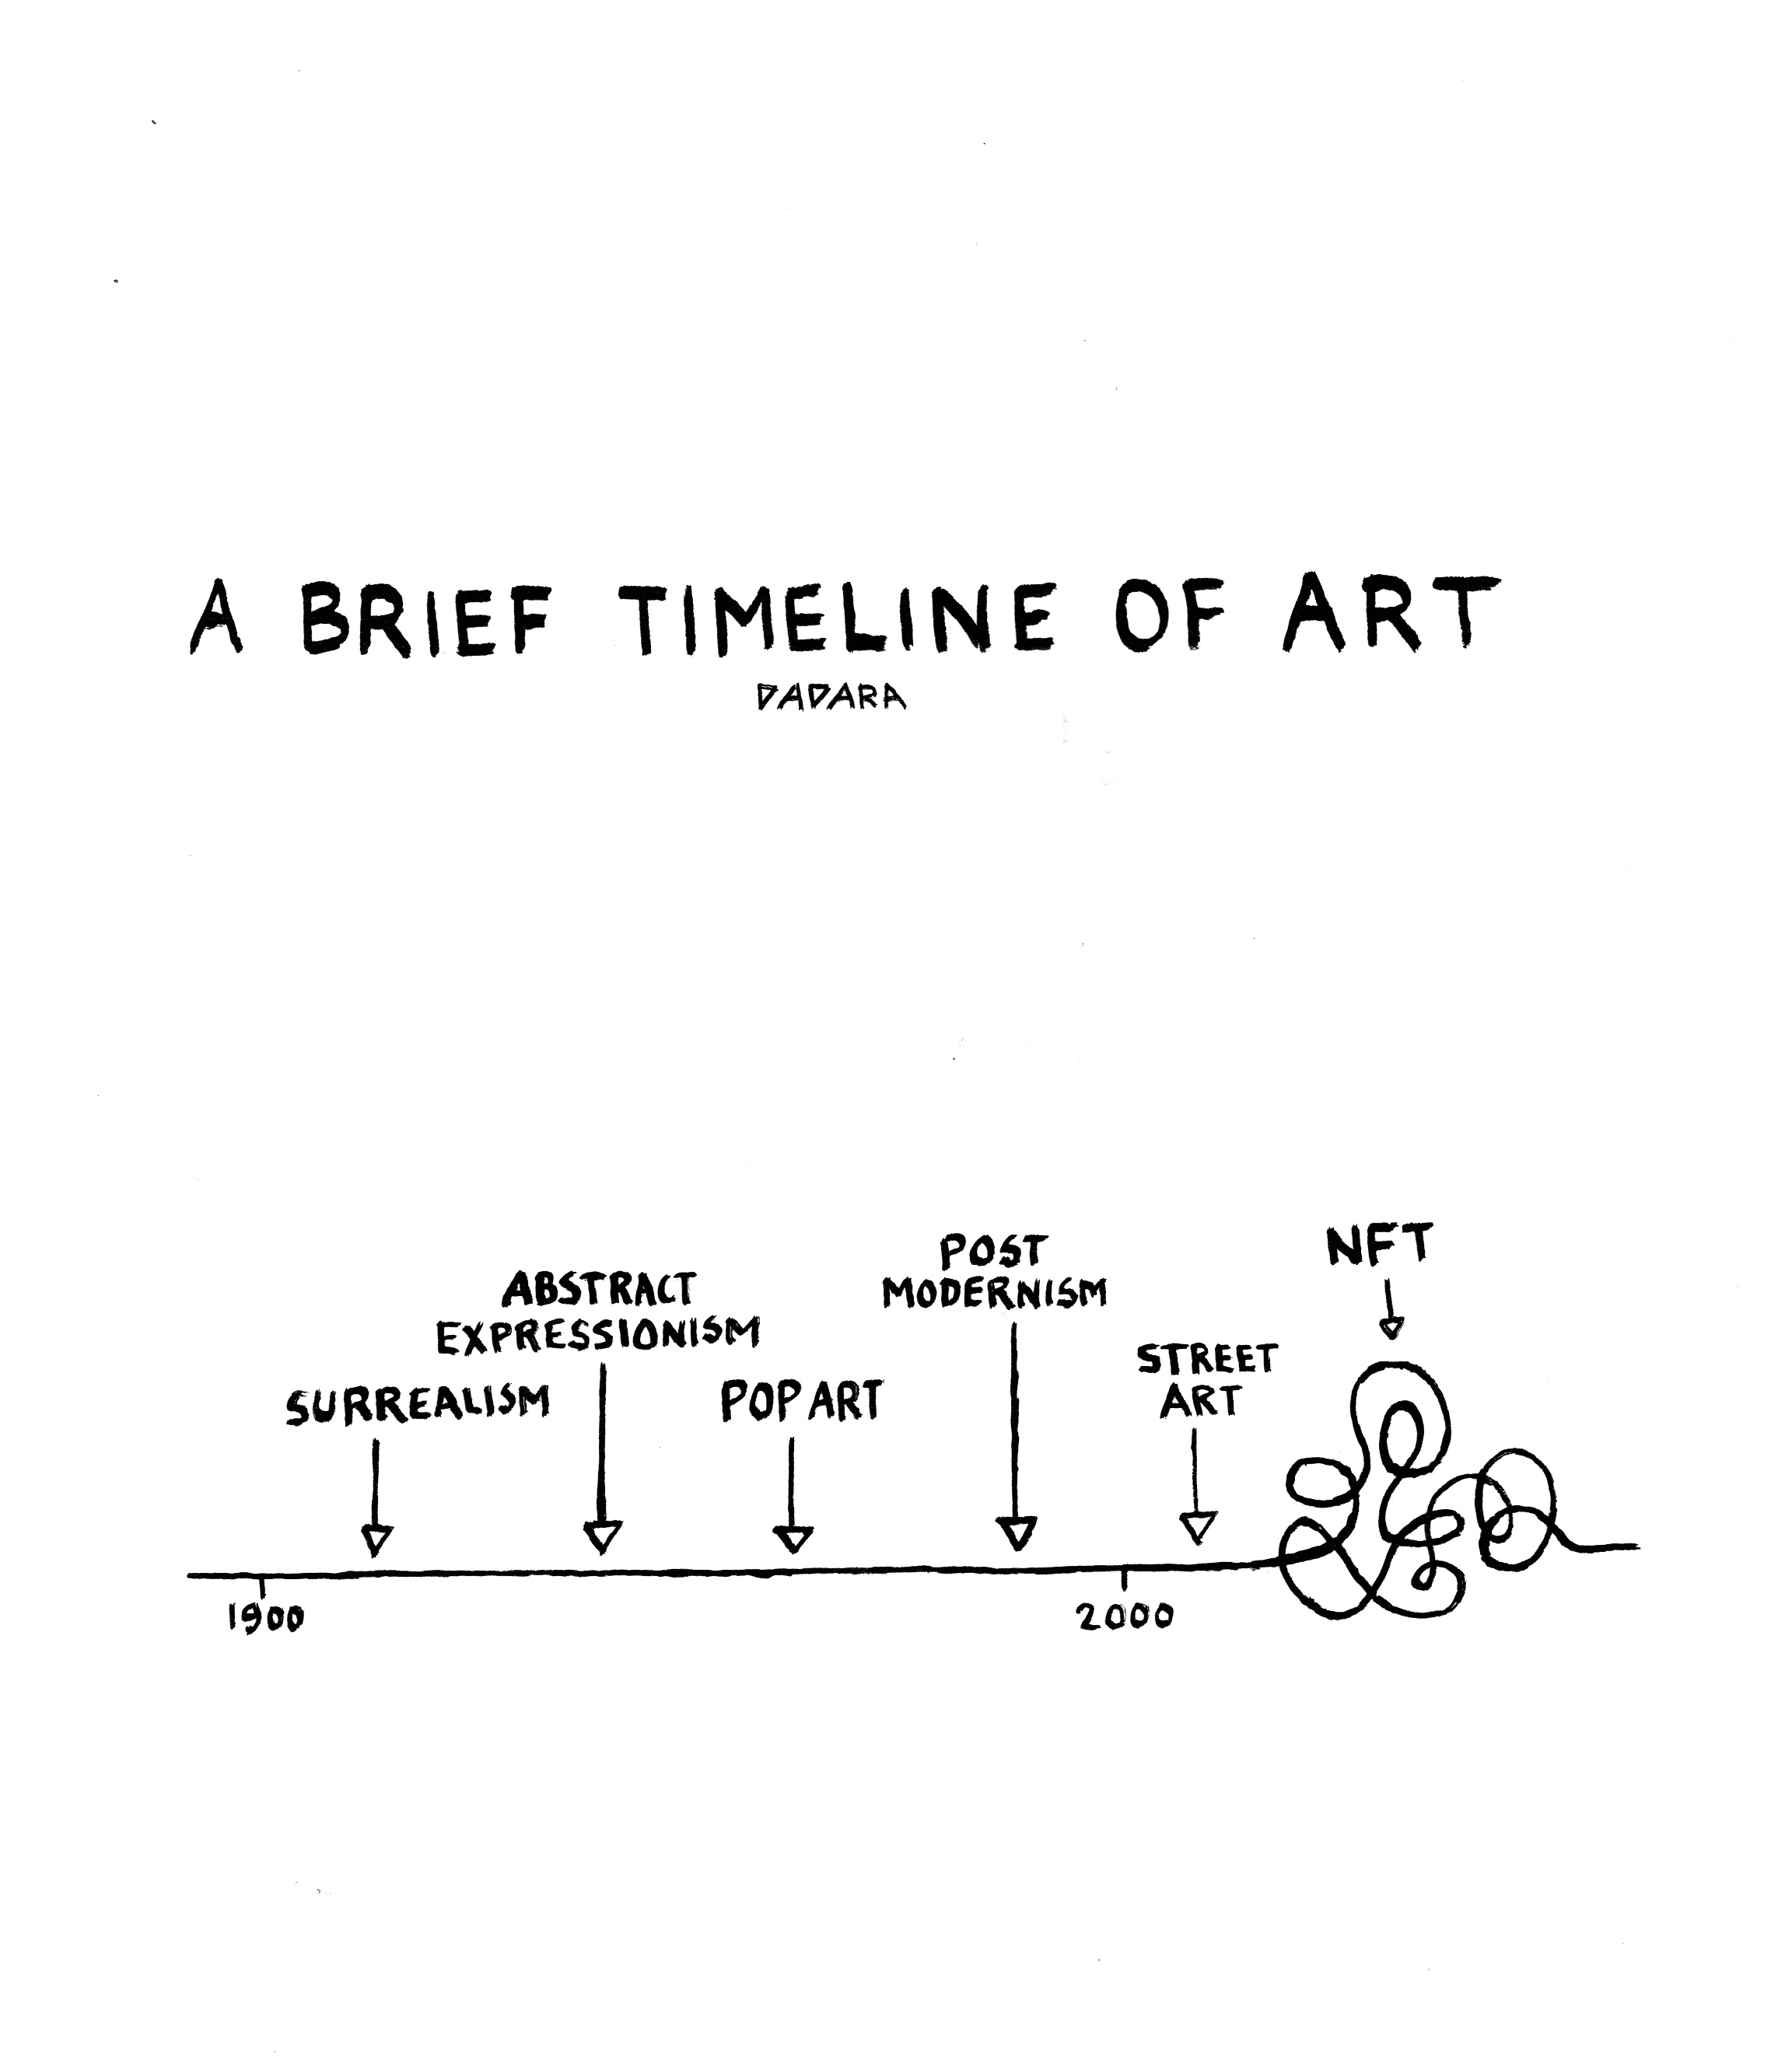 A brief timeline of Art